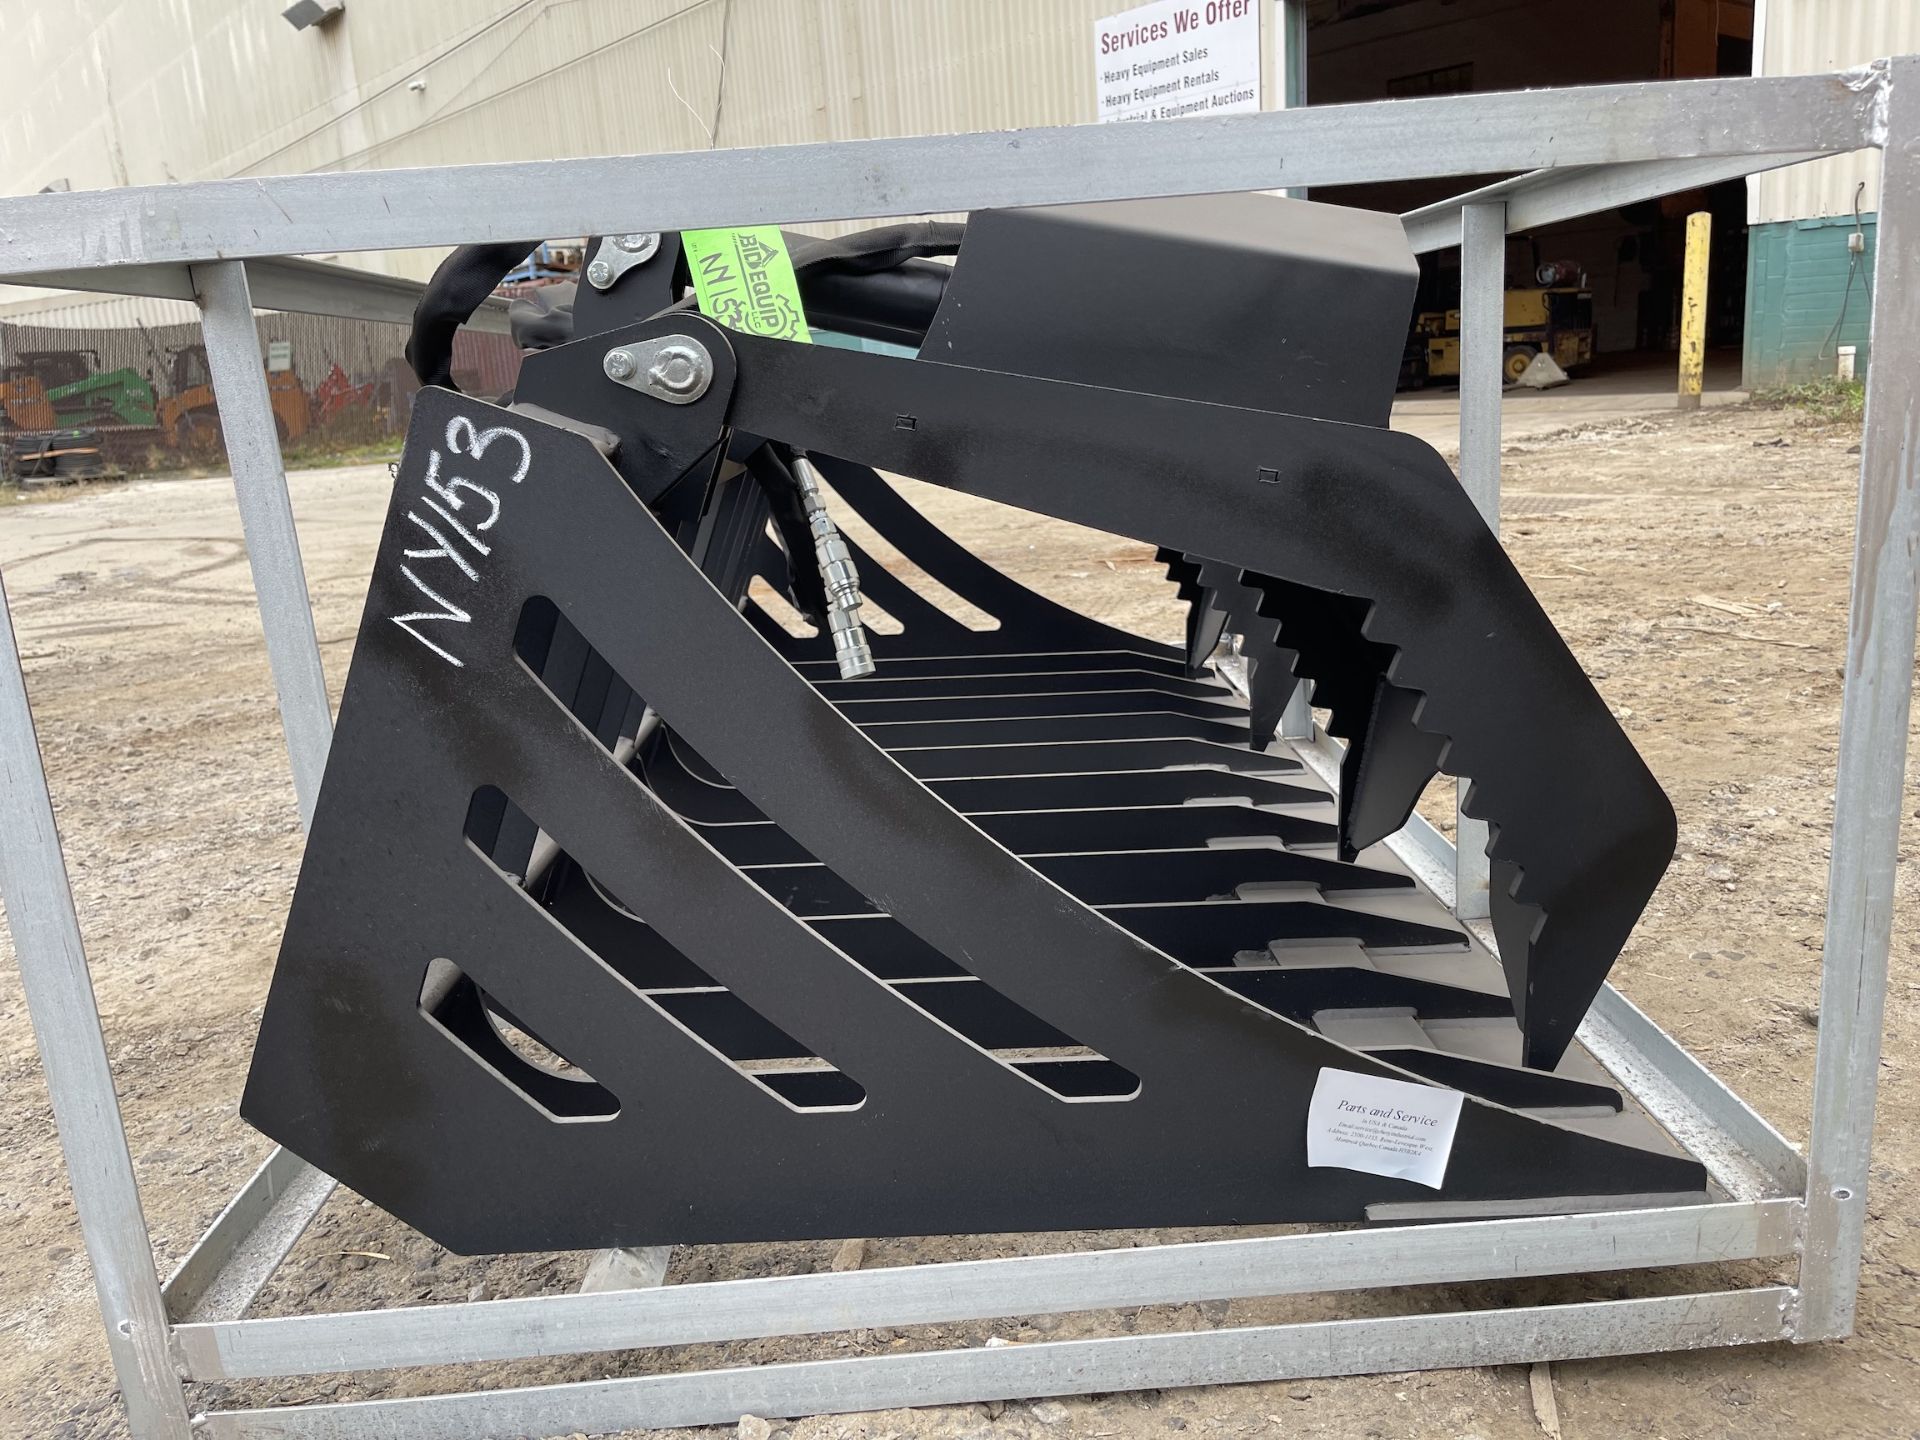 Brand New Greatbear 72" Rock Grapple Bucket Skid Steer Attachment (NY153) - Image 4 of 12